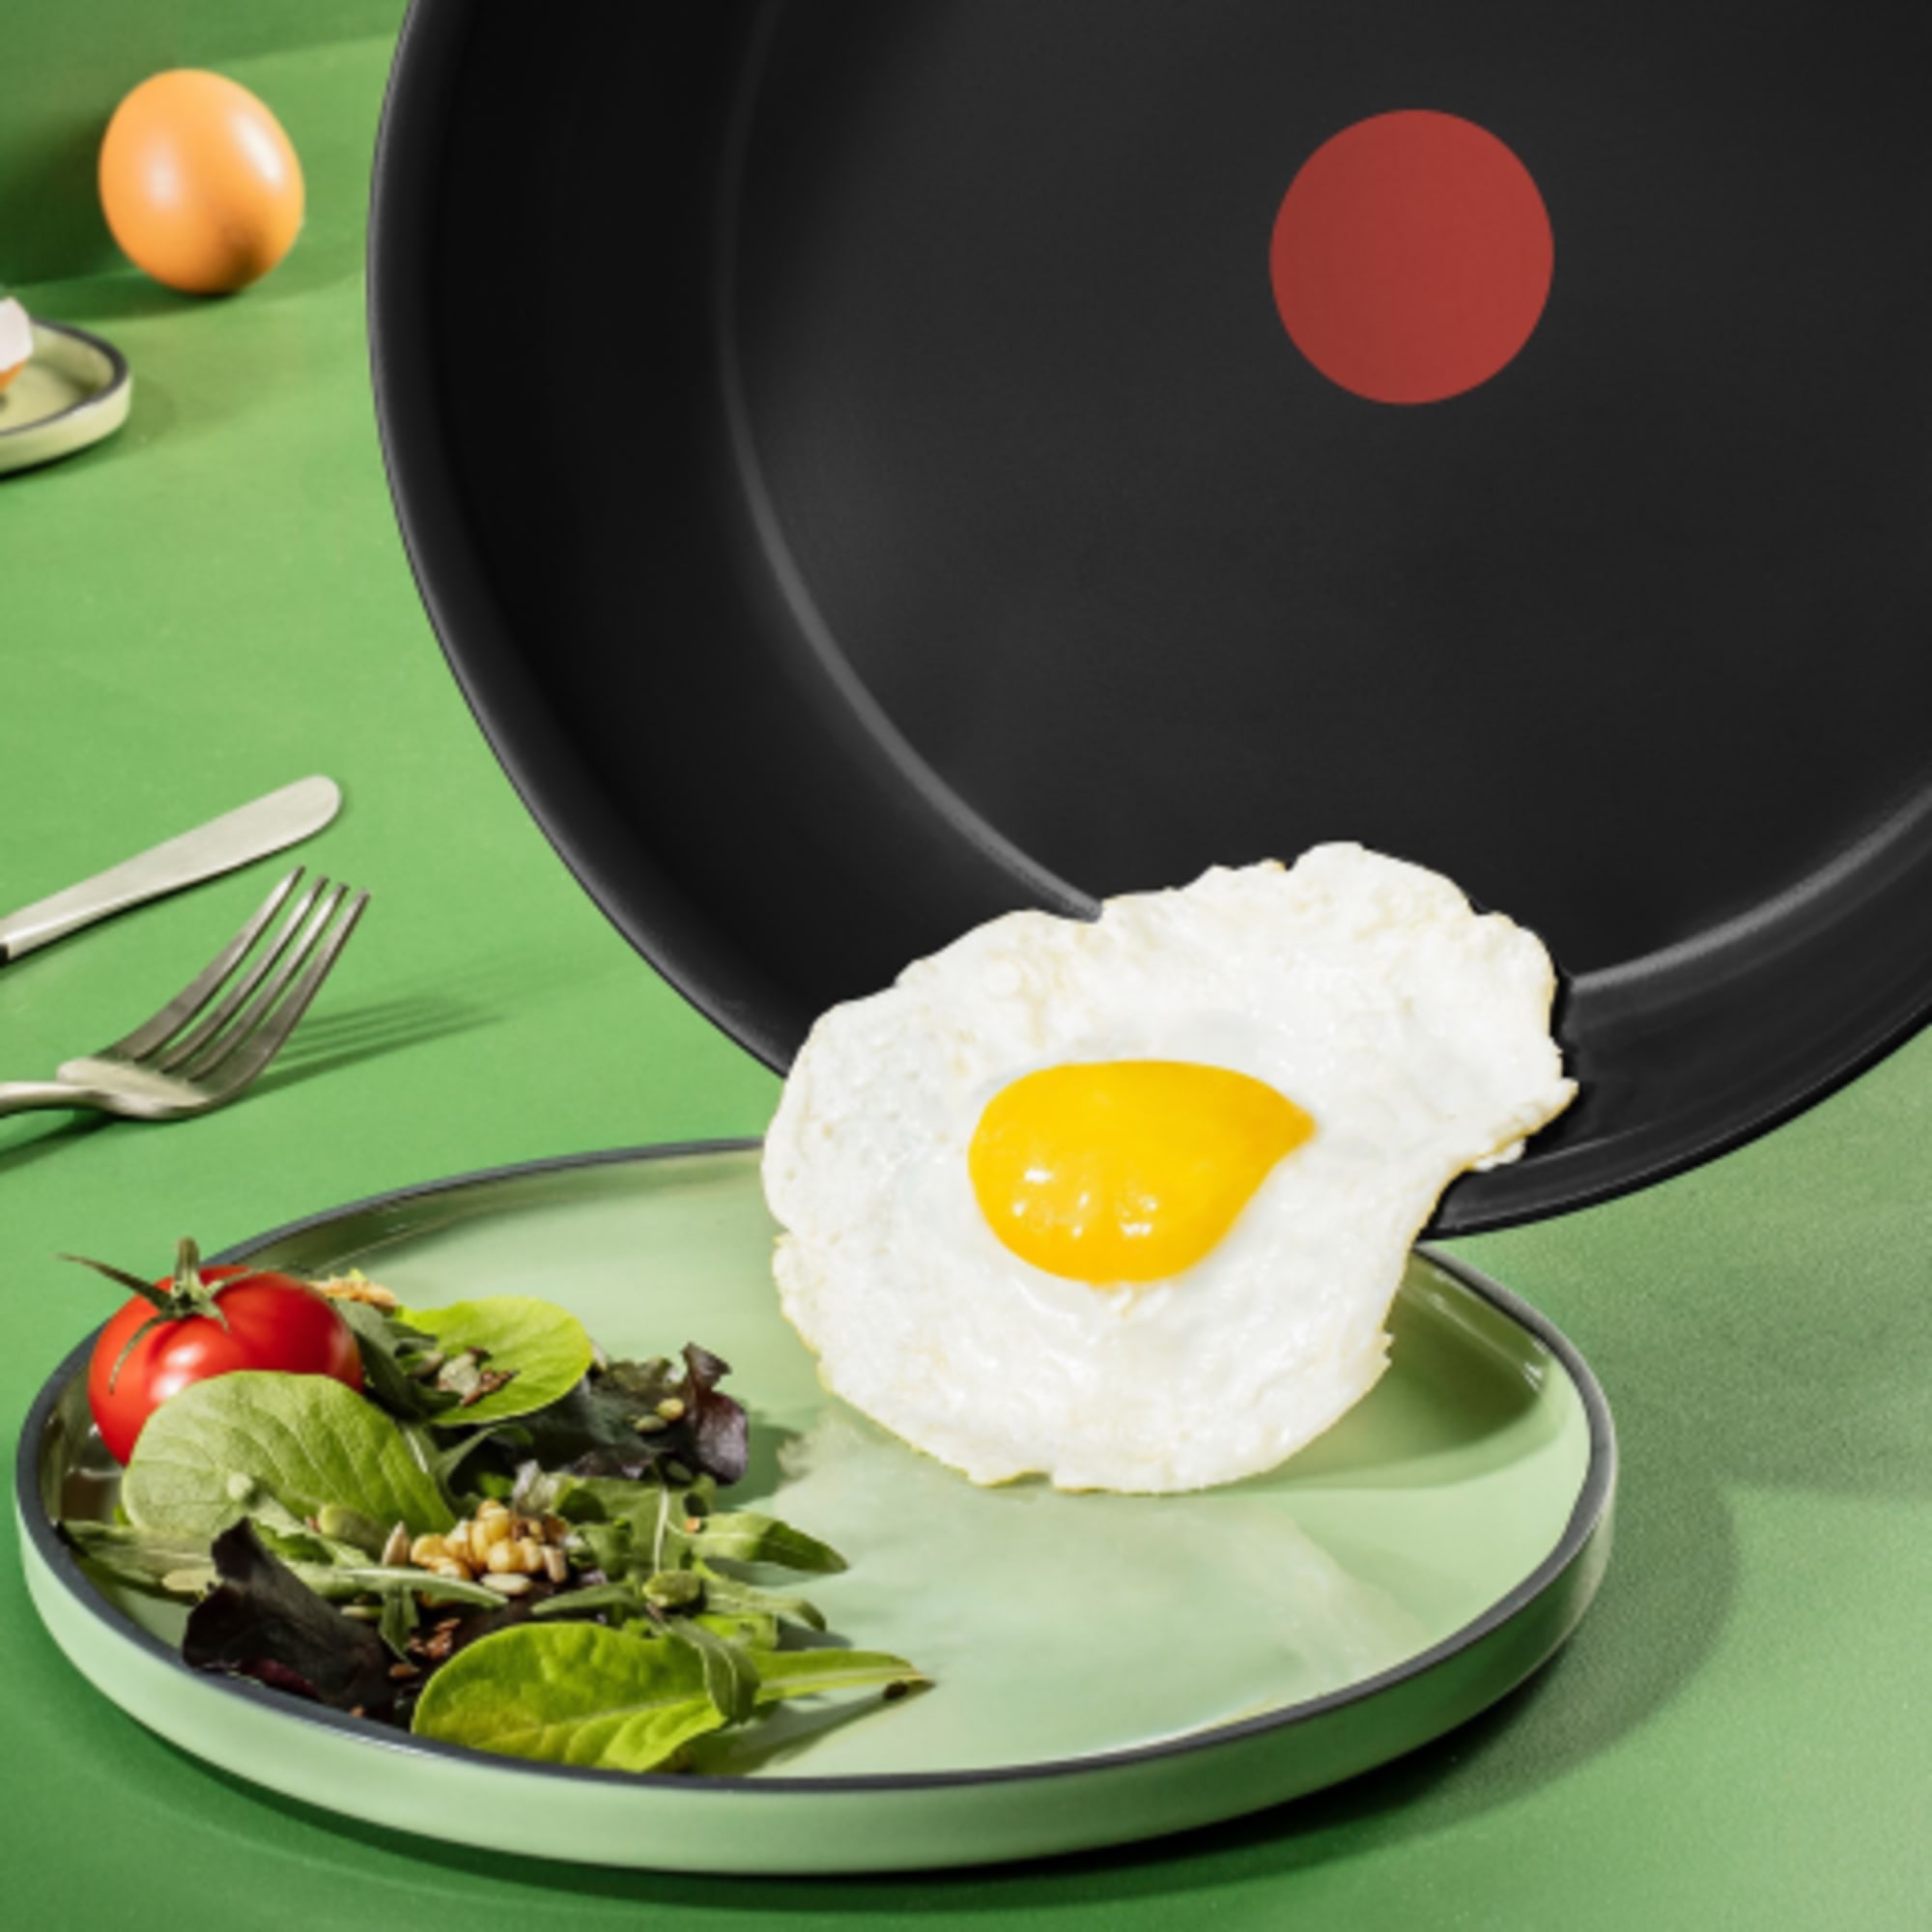 https://res.cloudinary.com/kitchenwarehouse/image/upload/c_fill,g_face,w_475/f_auto/t_PDP_2000x2000/Supplier%20Images%20/2000px/Tefal-Renew-Black-Ceramic-Induction-Frypan-28cm_3_2000px.jpg?imagetype=pdp_thumbnail